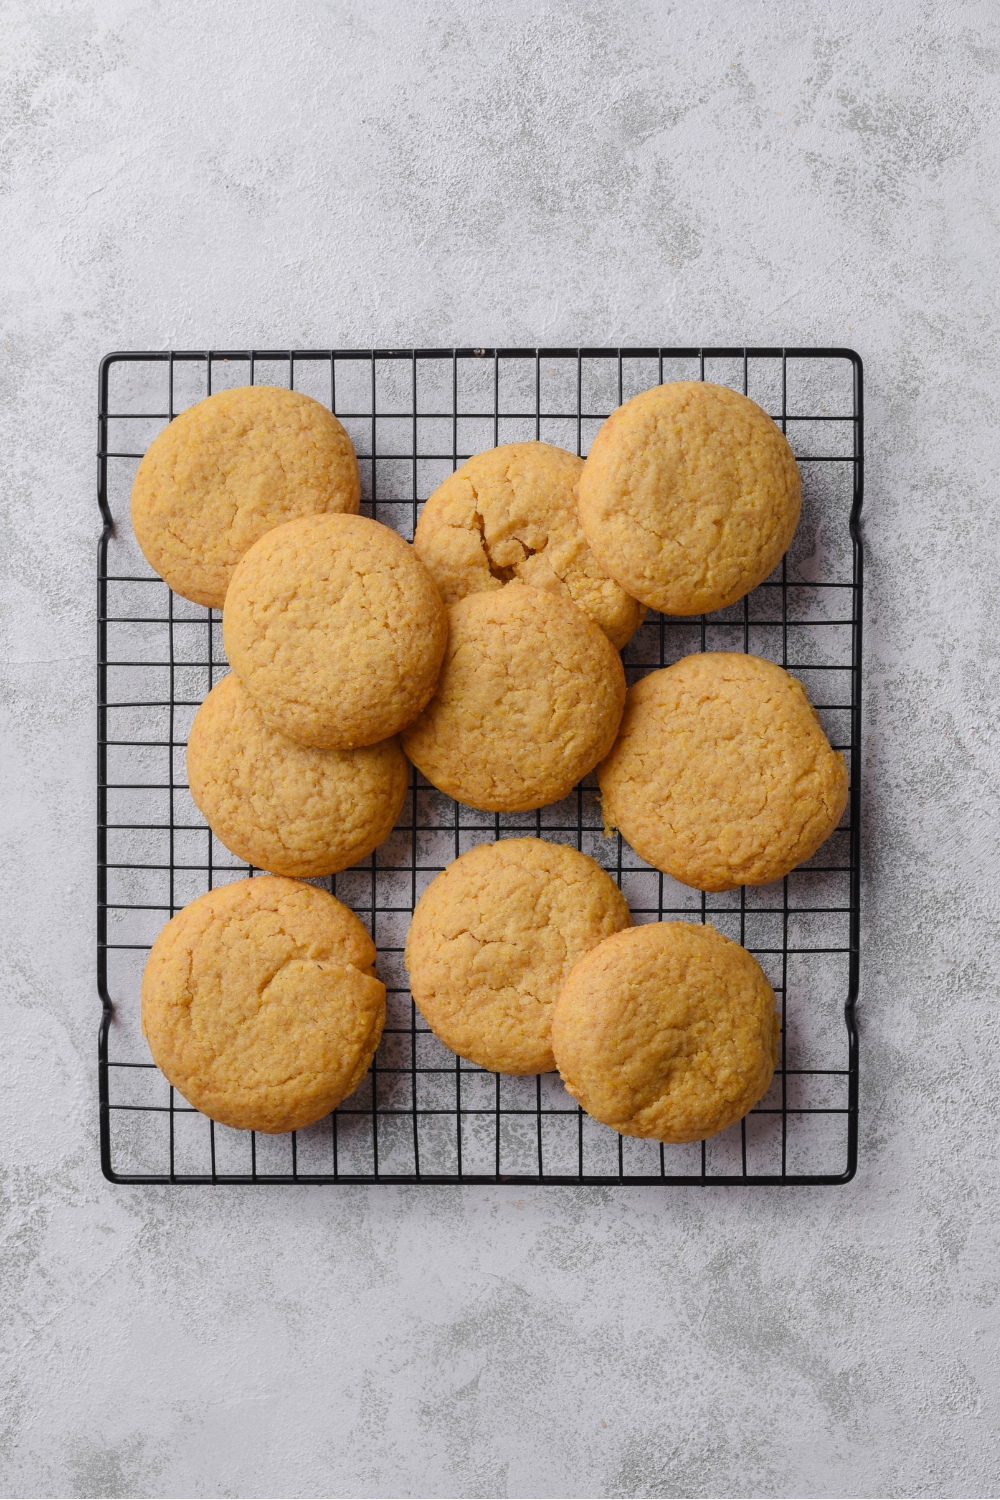 A pile of freshly baked cornbread cookies on a wire rack.